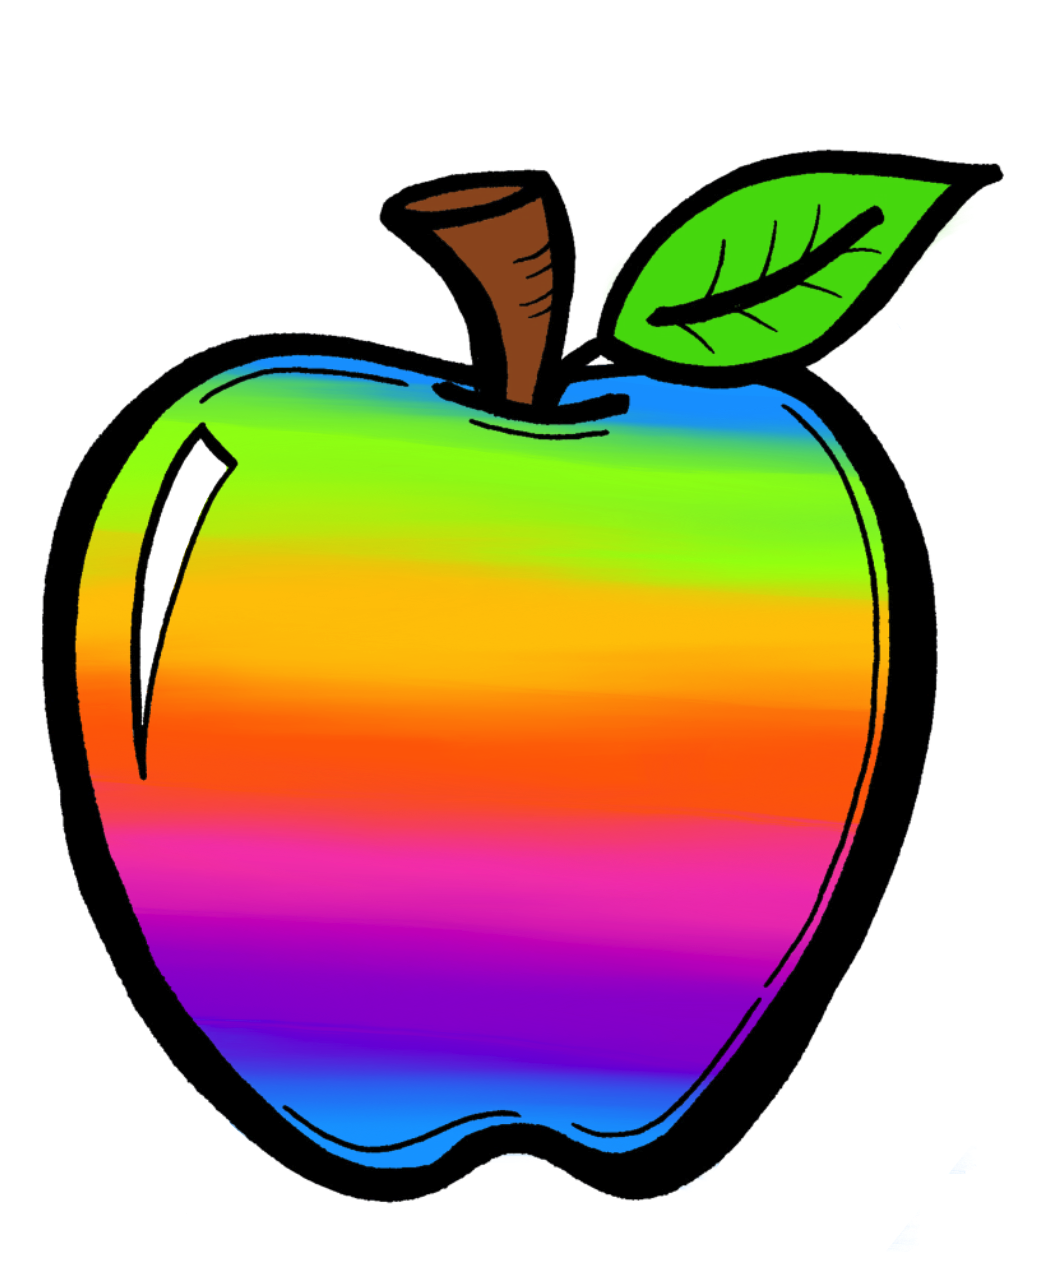 free clipart of an apple - photo #37